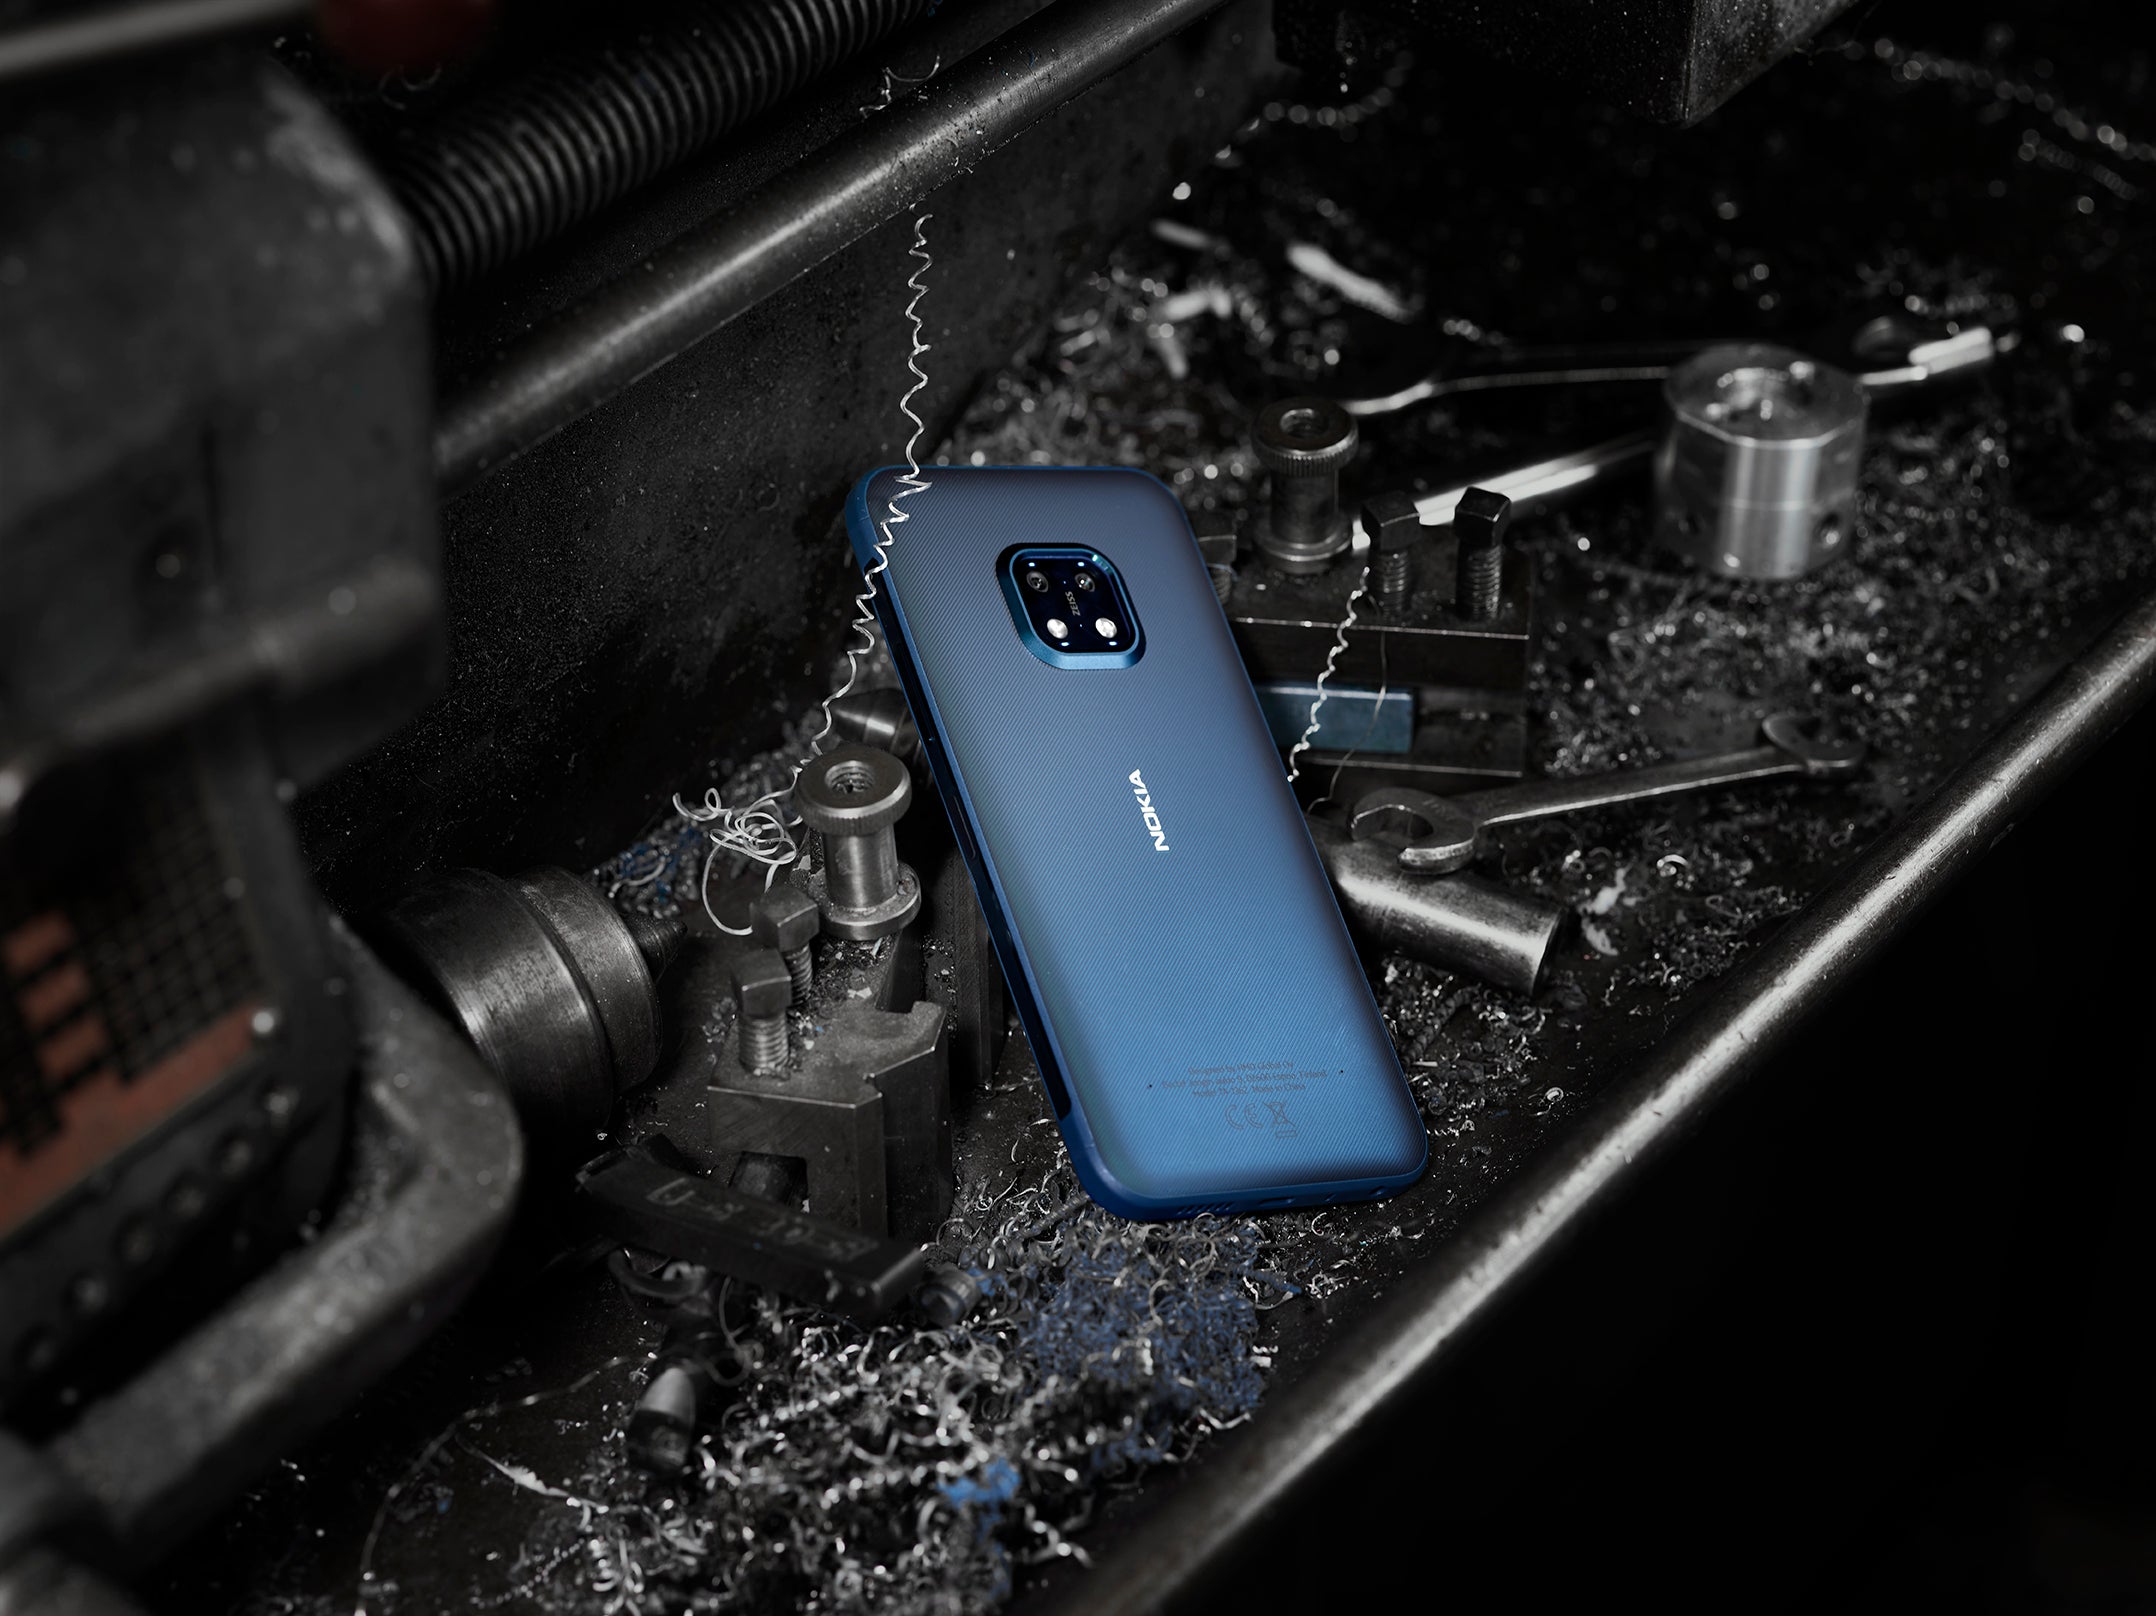 The two flashes on the Nokia XR20 are something you don't see everyday - Nokia XR20 and C30 are official; Check out HMD's first rugged smartphone